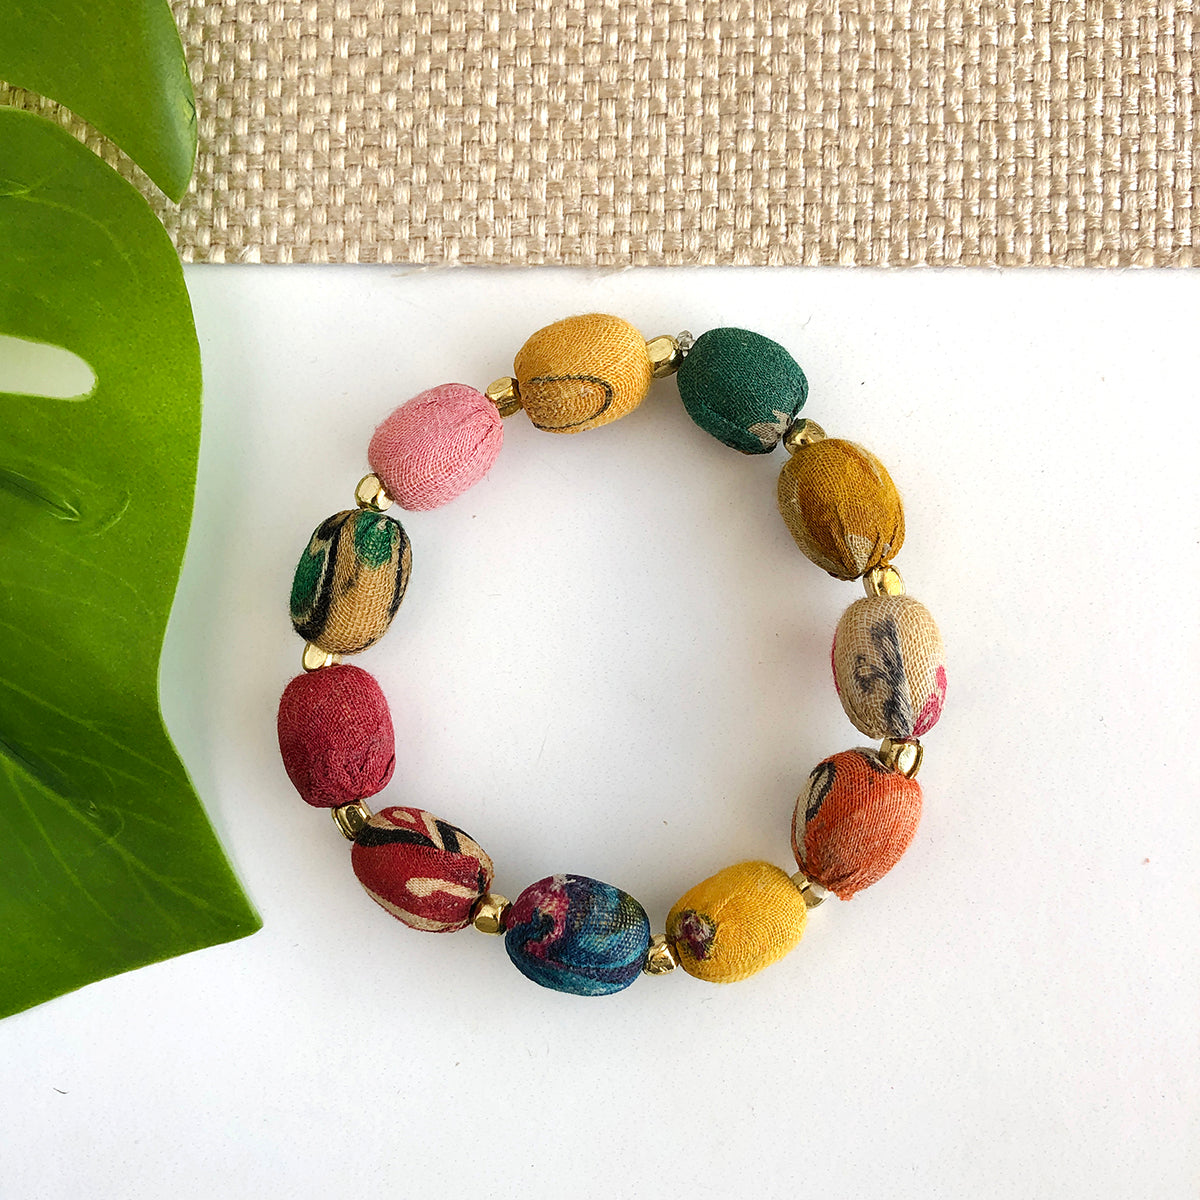 A colorful strand of textile-wrapped oblong beads is spaced out with small gold beads to create a bracelet.